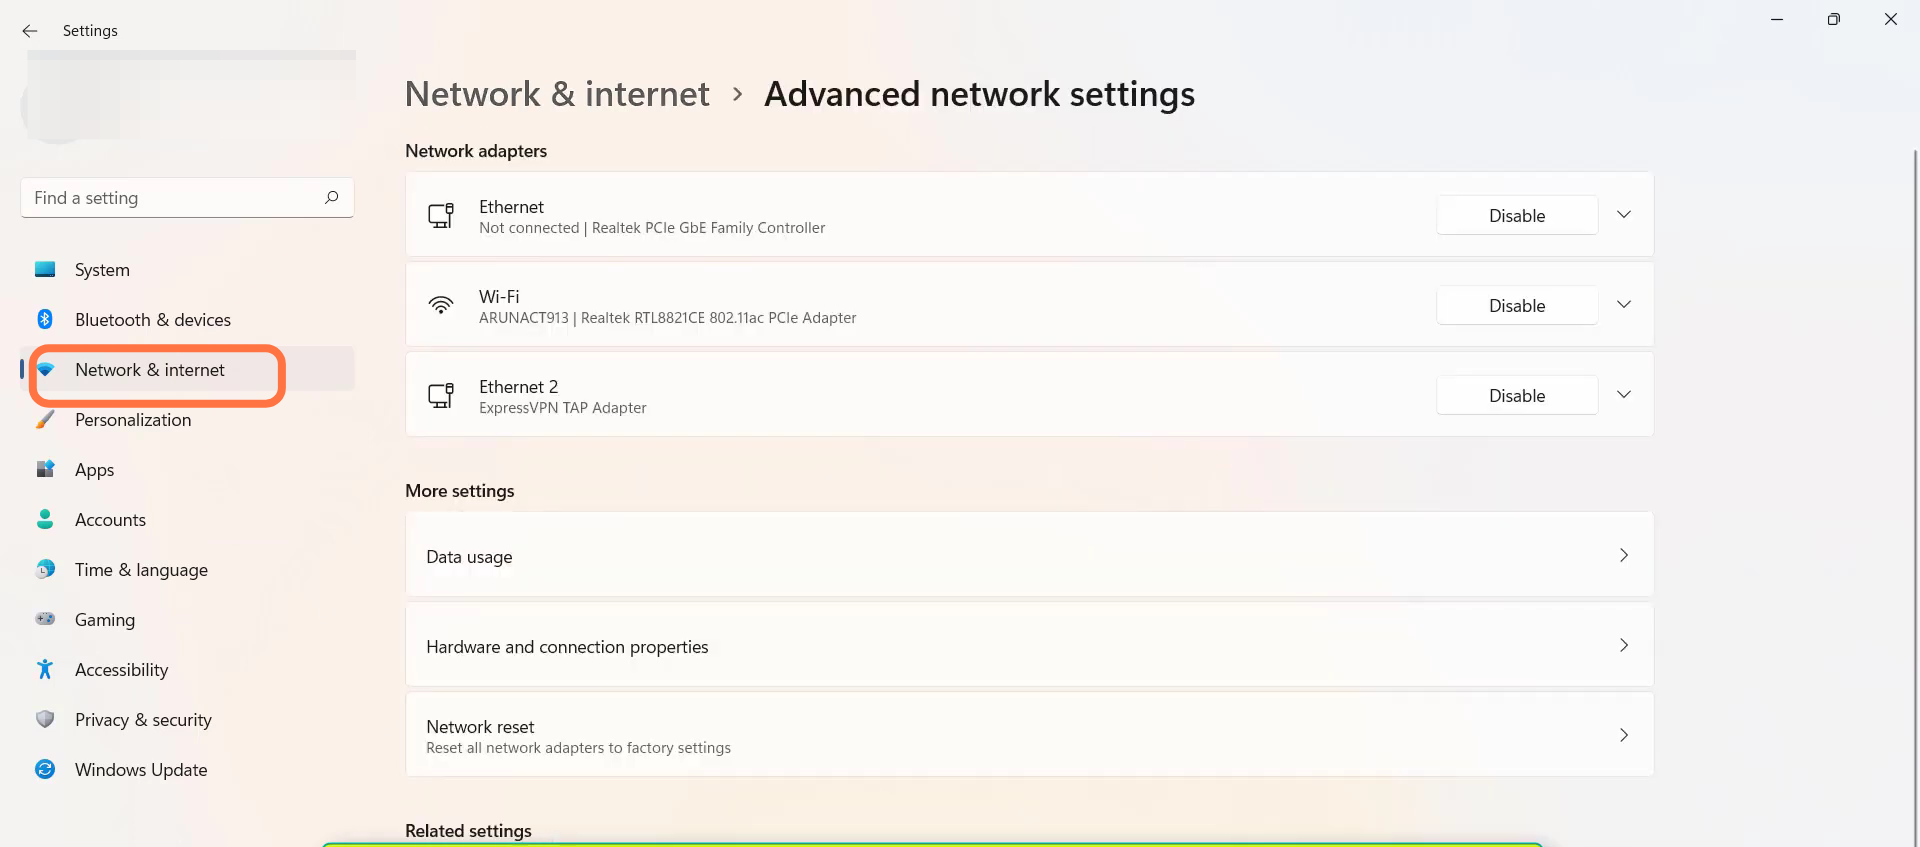 Go to "Network & Internet" and then navigate to Advanced network settings.